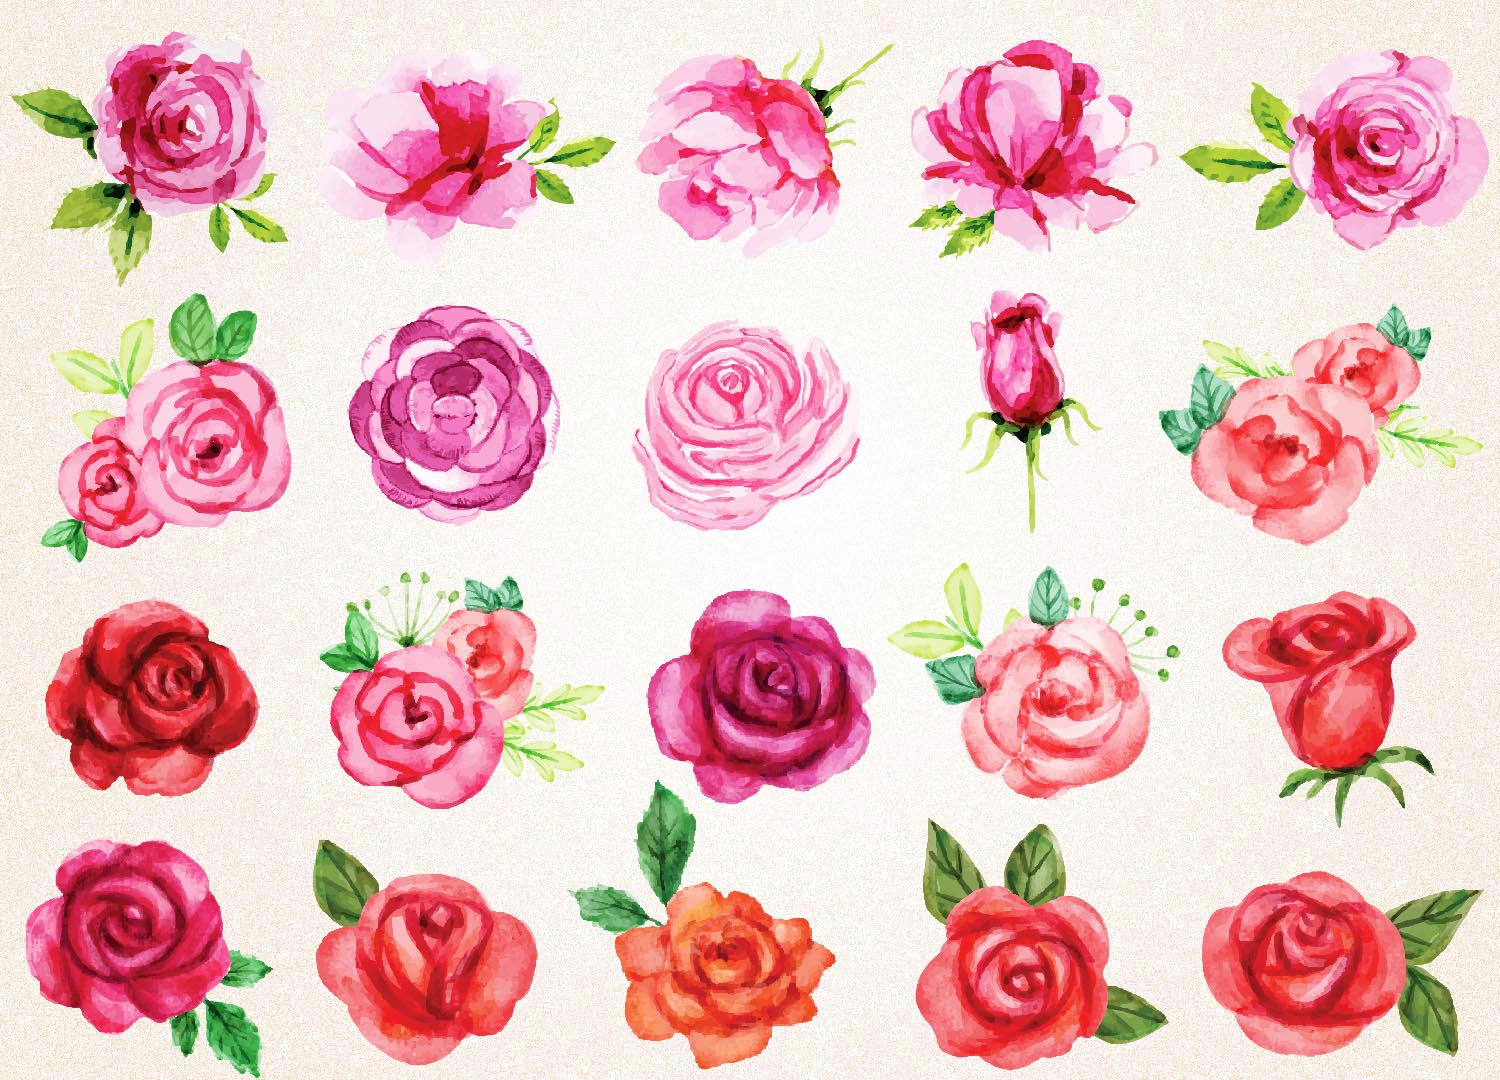 Download Watercolor Roses Clipart/Watercolor Roses SVGPNG 300 ppi/Red